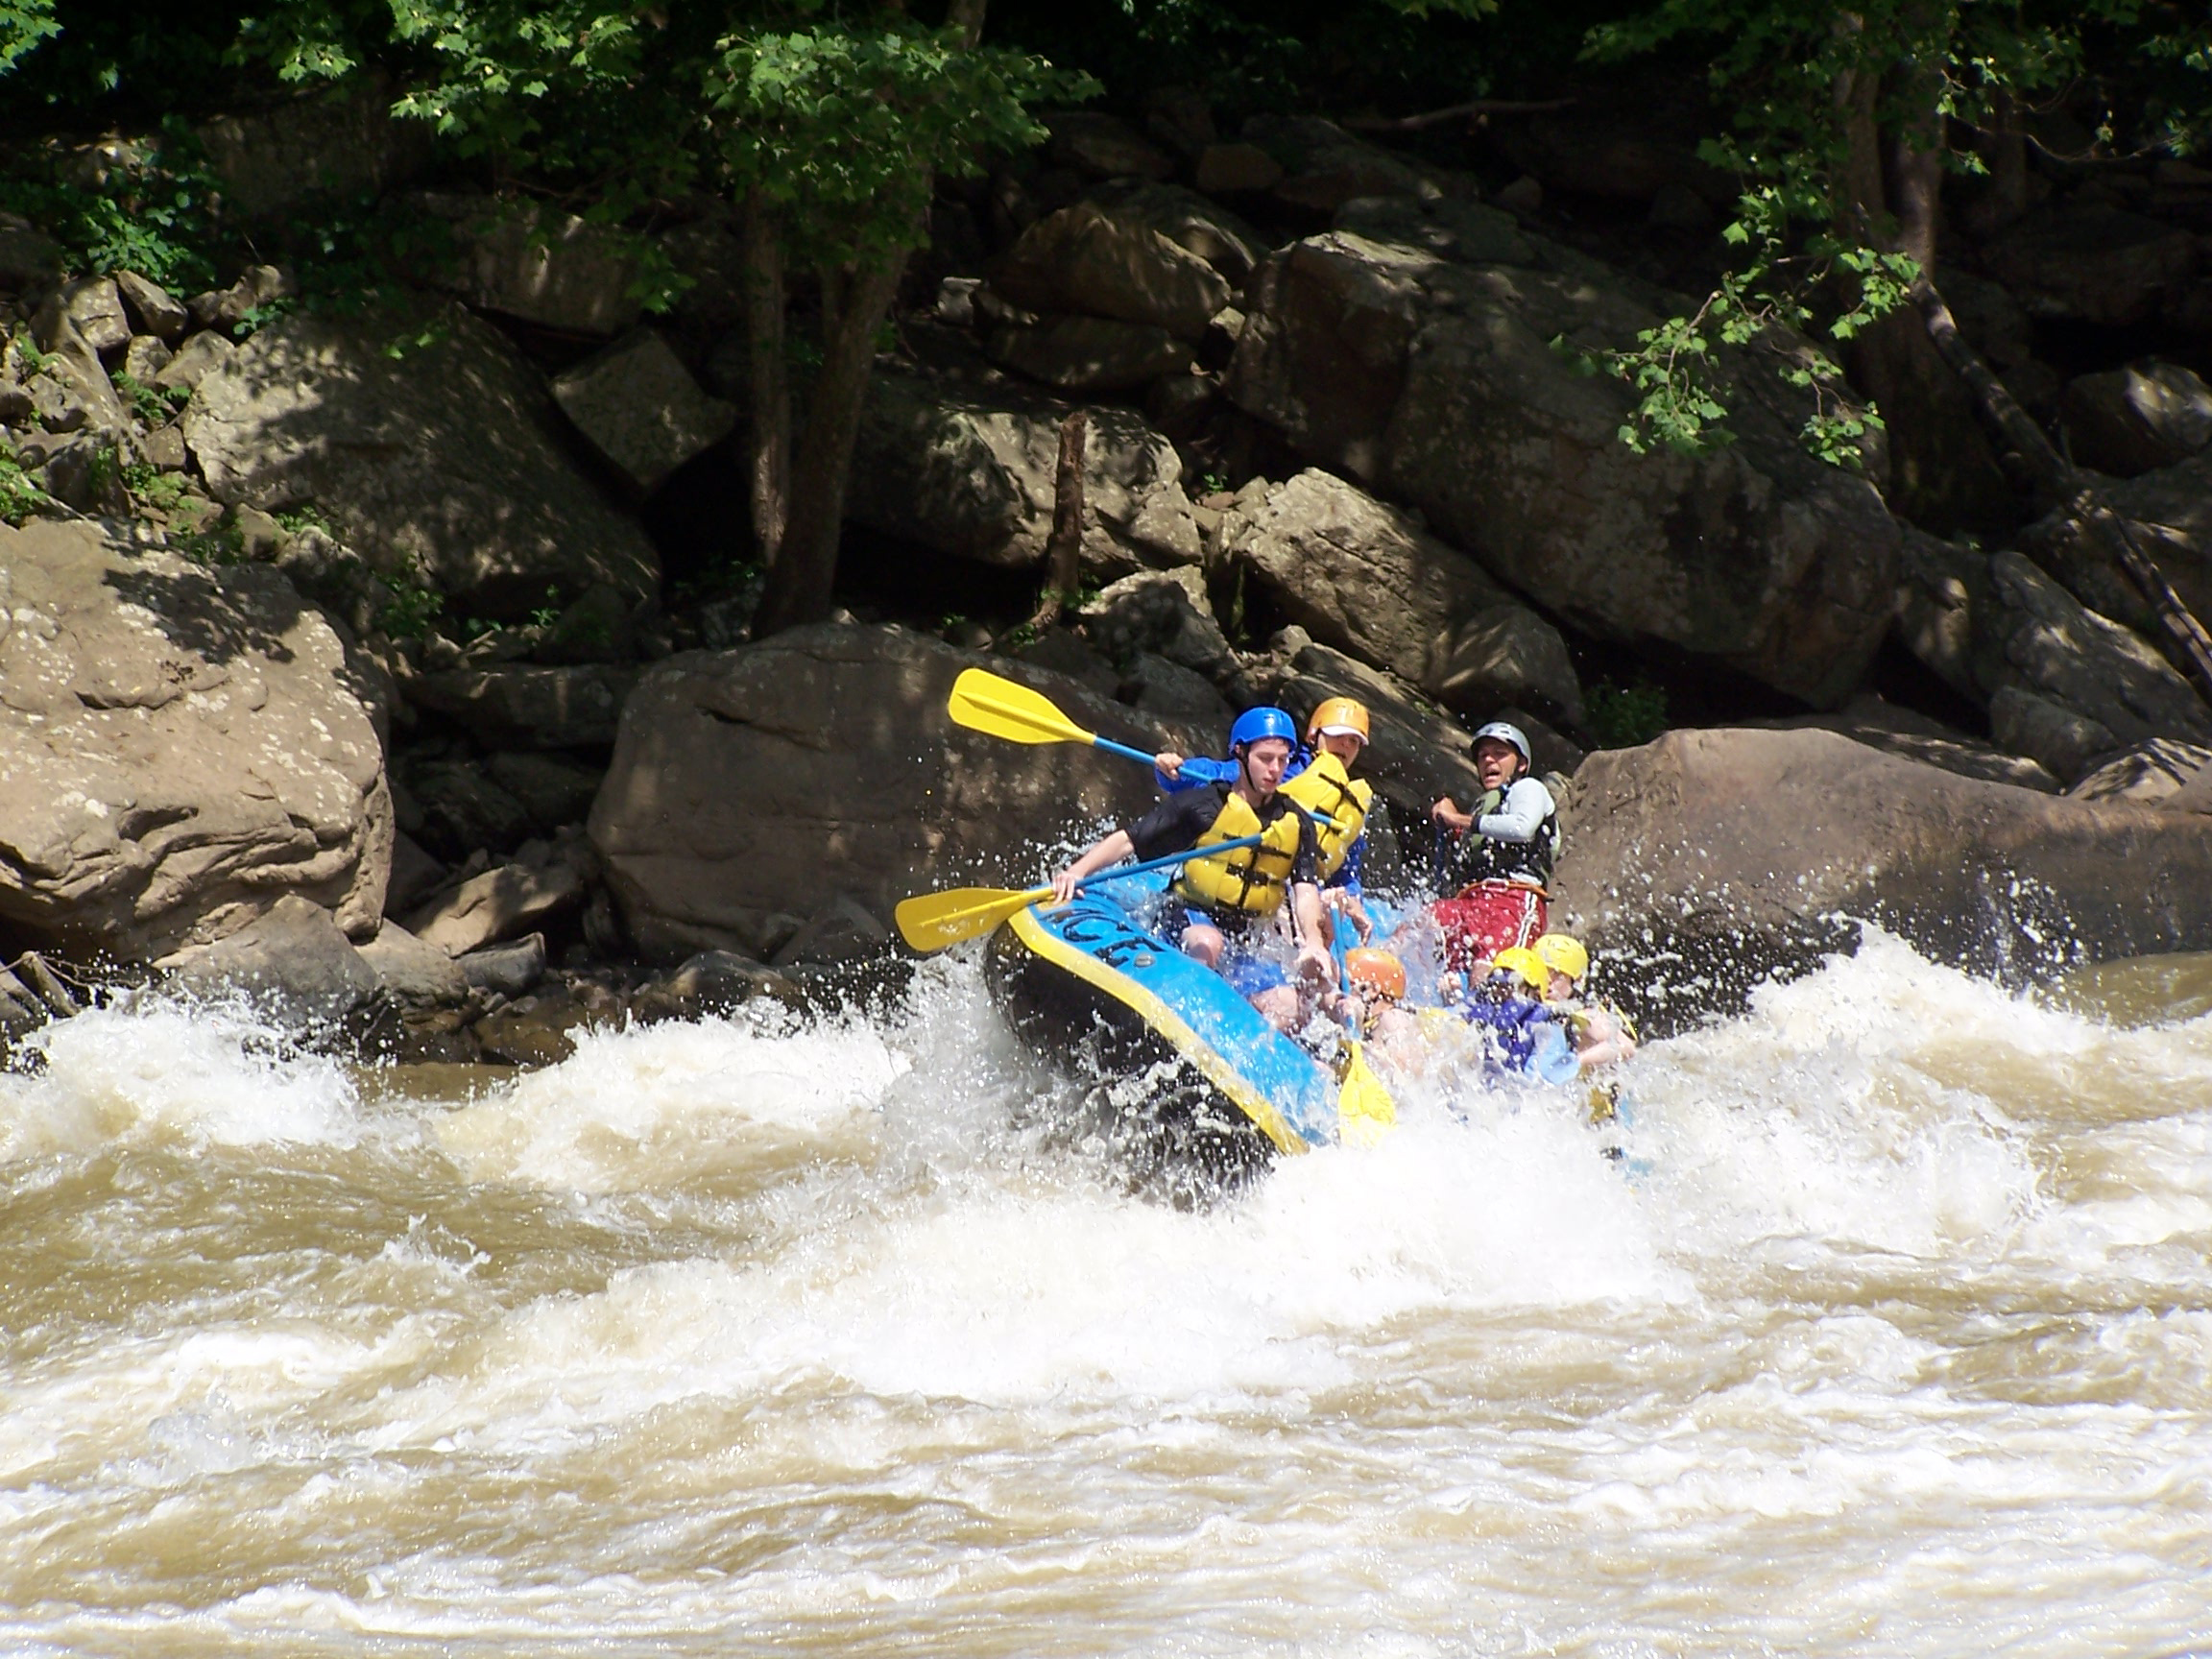 Trying to stay in the raft on the Gauley River